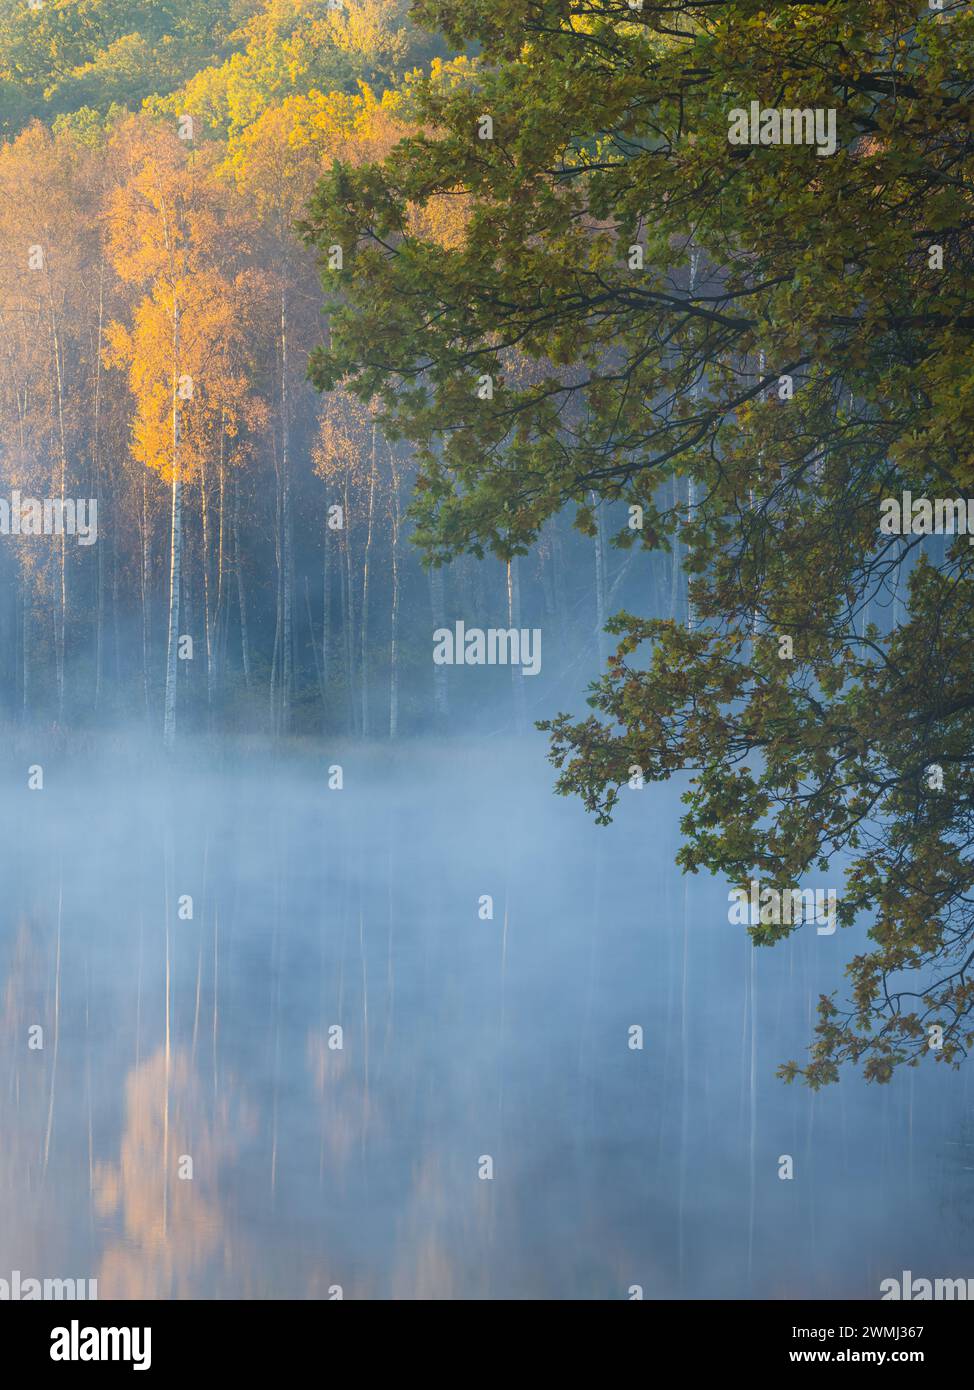 A body of water, likely a river, surrounded by dense trees in Sweden. The scene is covered in a thick fog, creating a mysterious and atmospheric envir Stock Photo